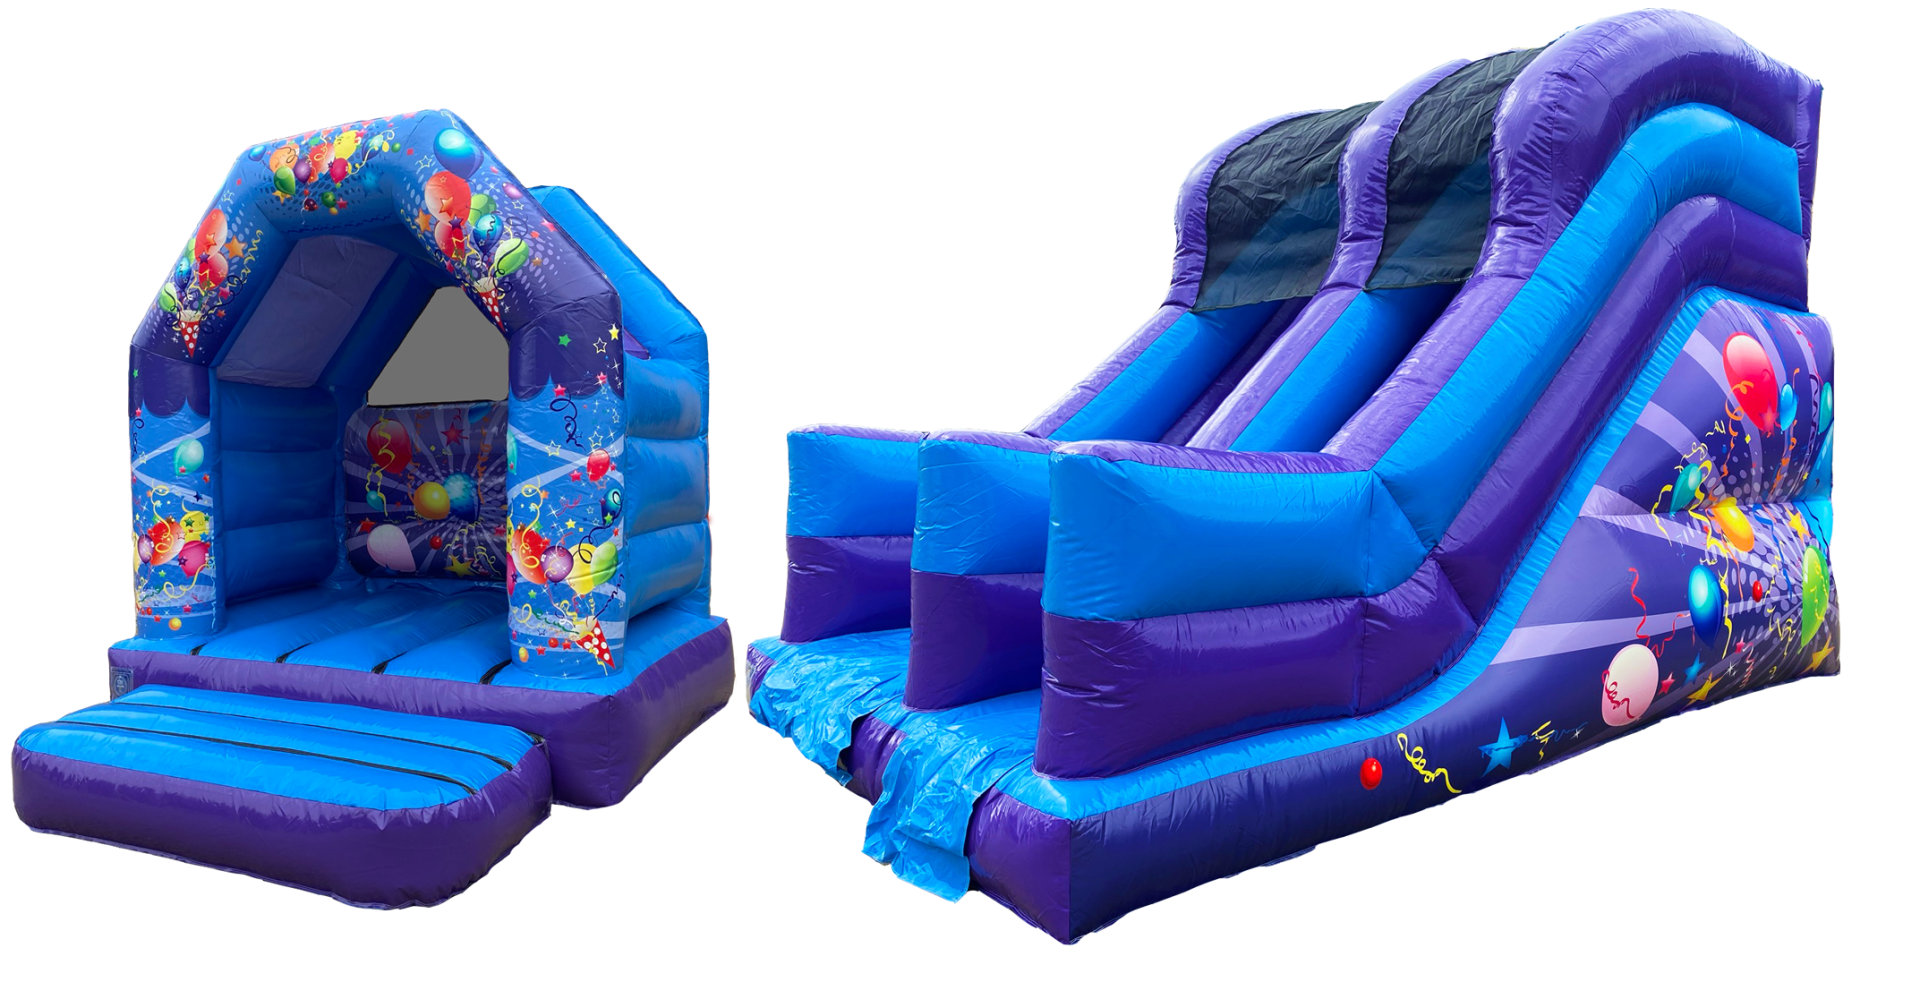 Blue and red bouncy castle and inflatable slide package for hire in shefford